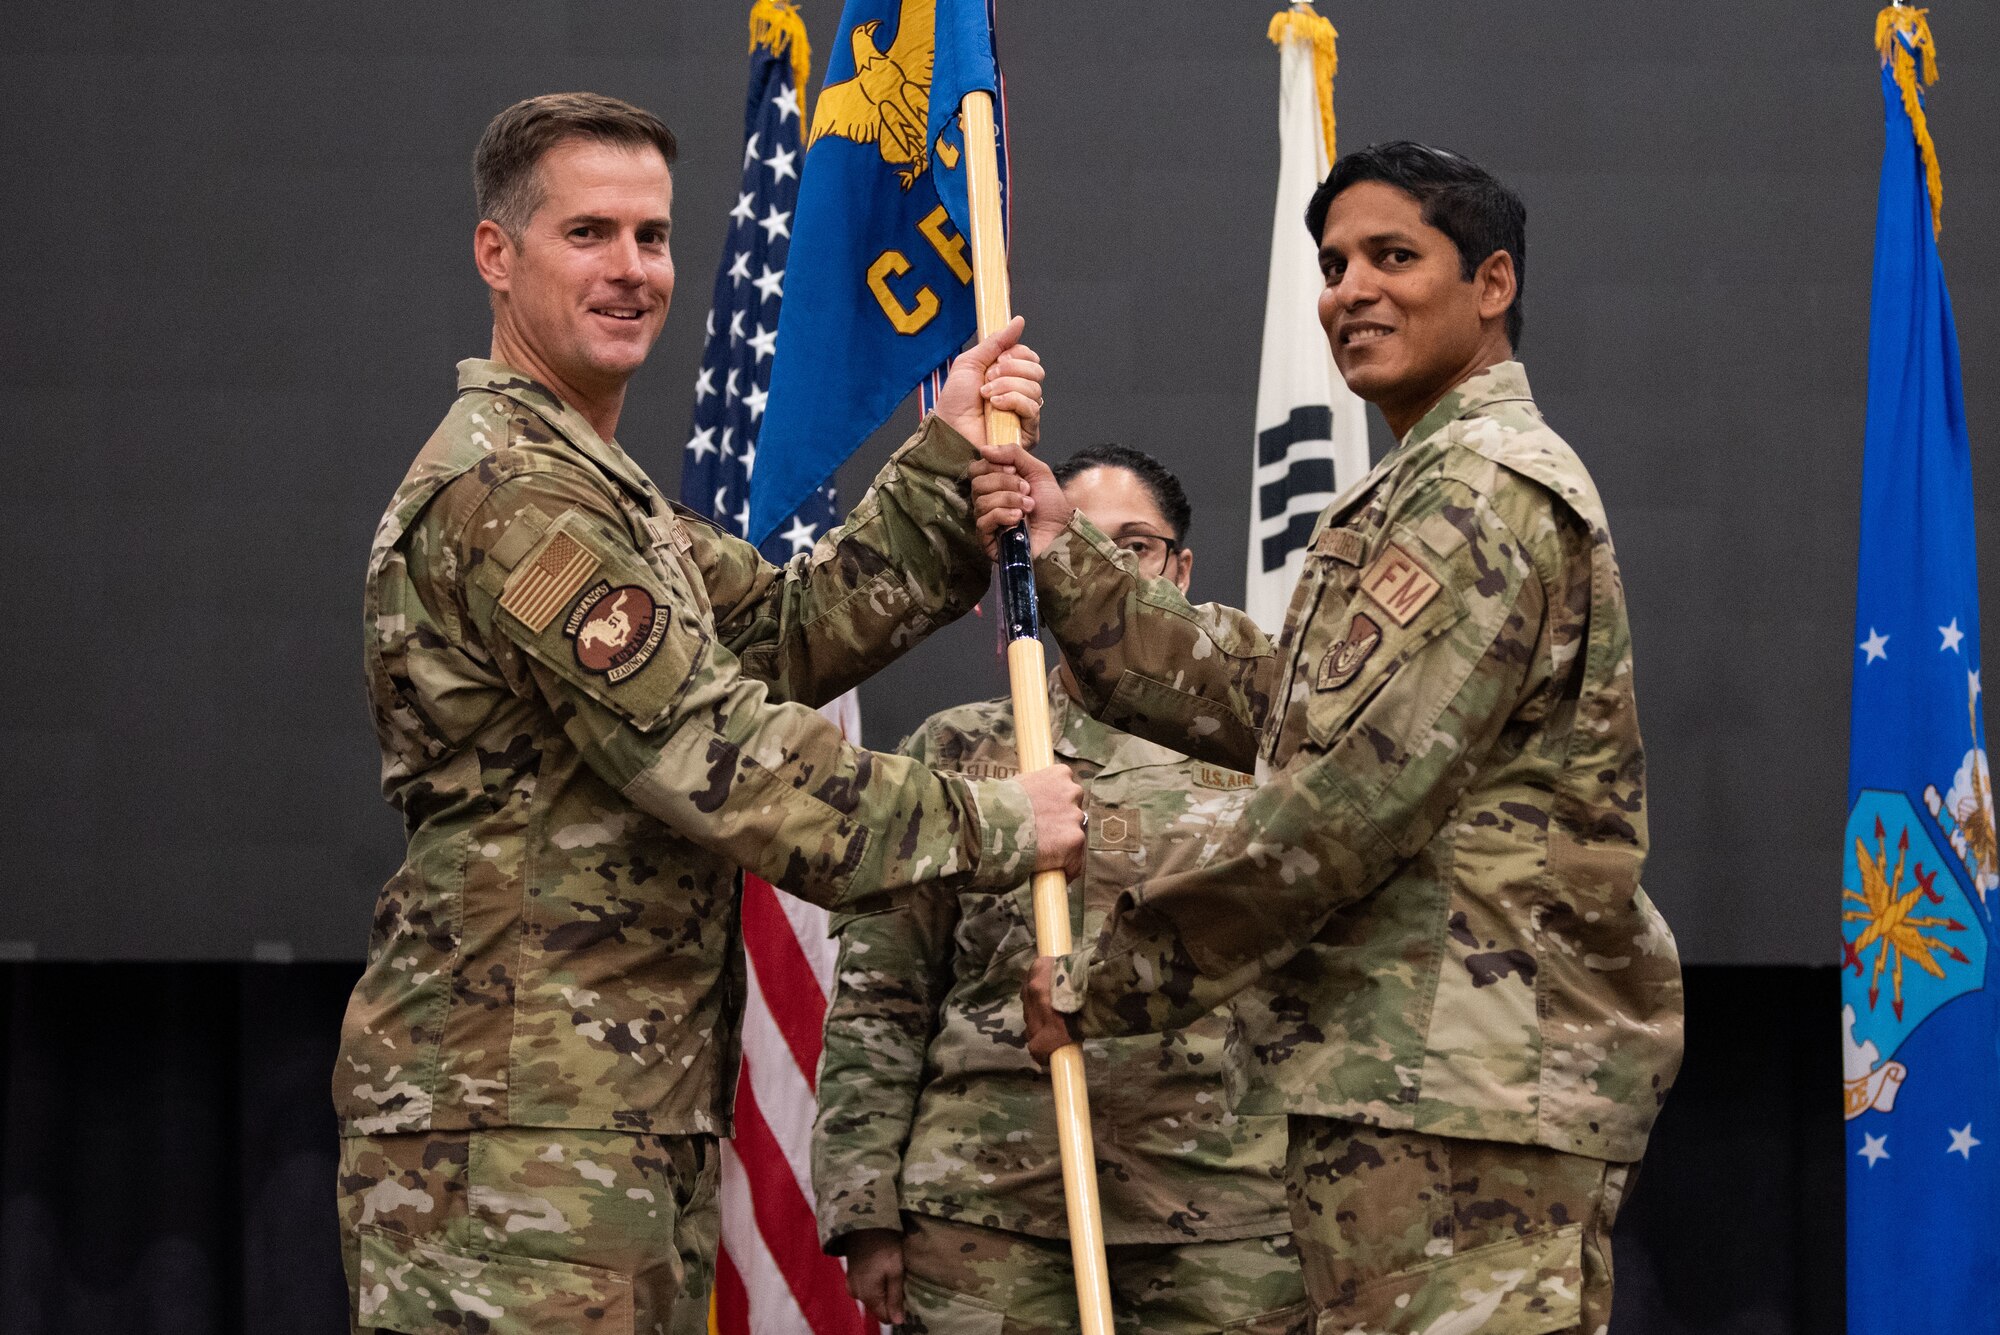 Col. Joshua Wood, 51st Fighter Wing commander, passes the guidon to Maj. Brett Ramnarine, 51st Comptroller Squadron newly appointed commander, during the squadron’s assumption of command ceremony at Osan Air Base, Republic of Korea, July 29, 2022.